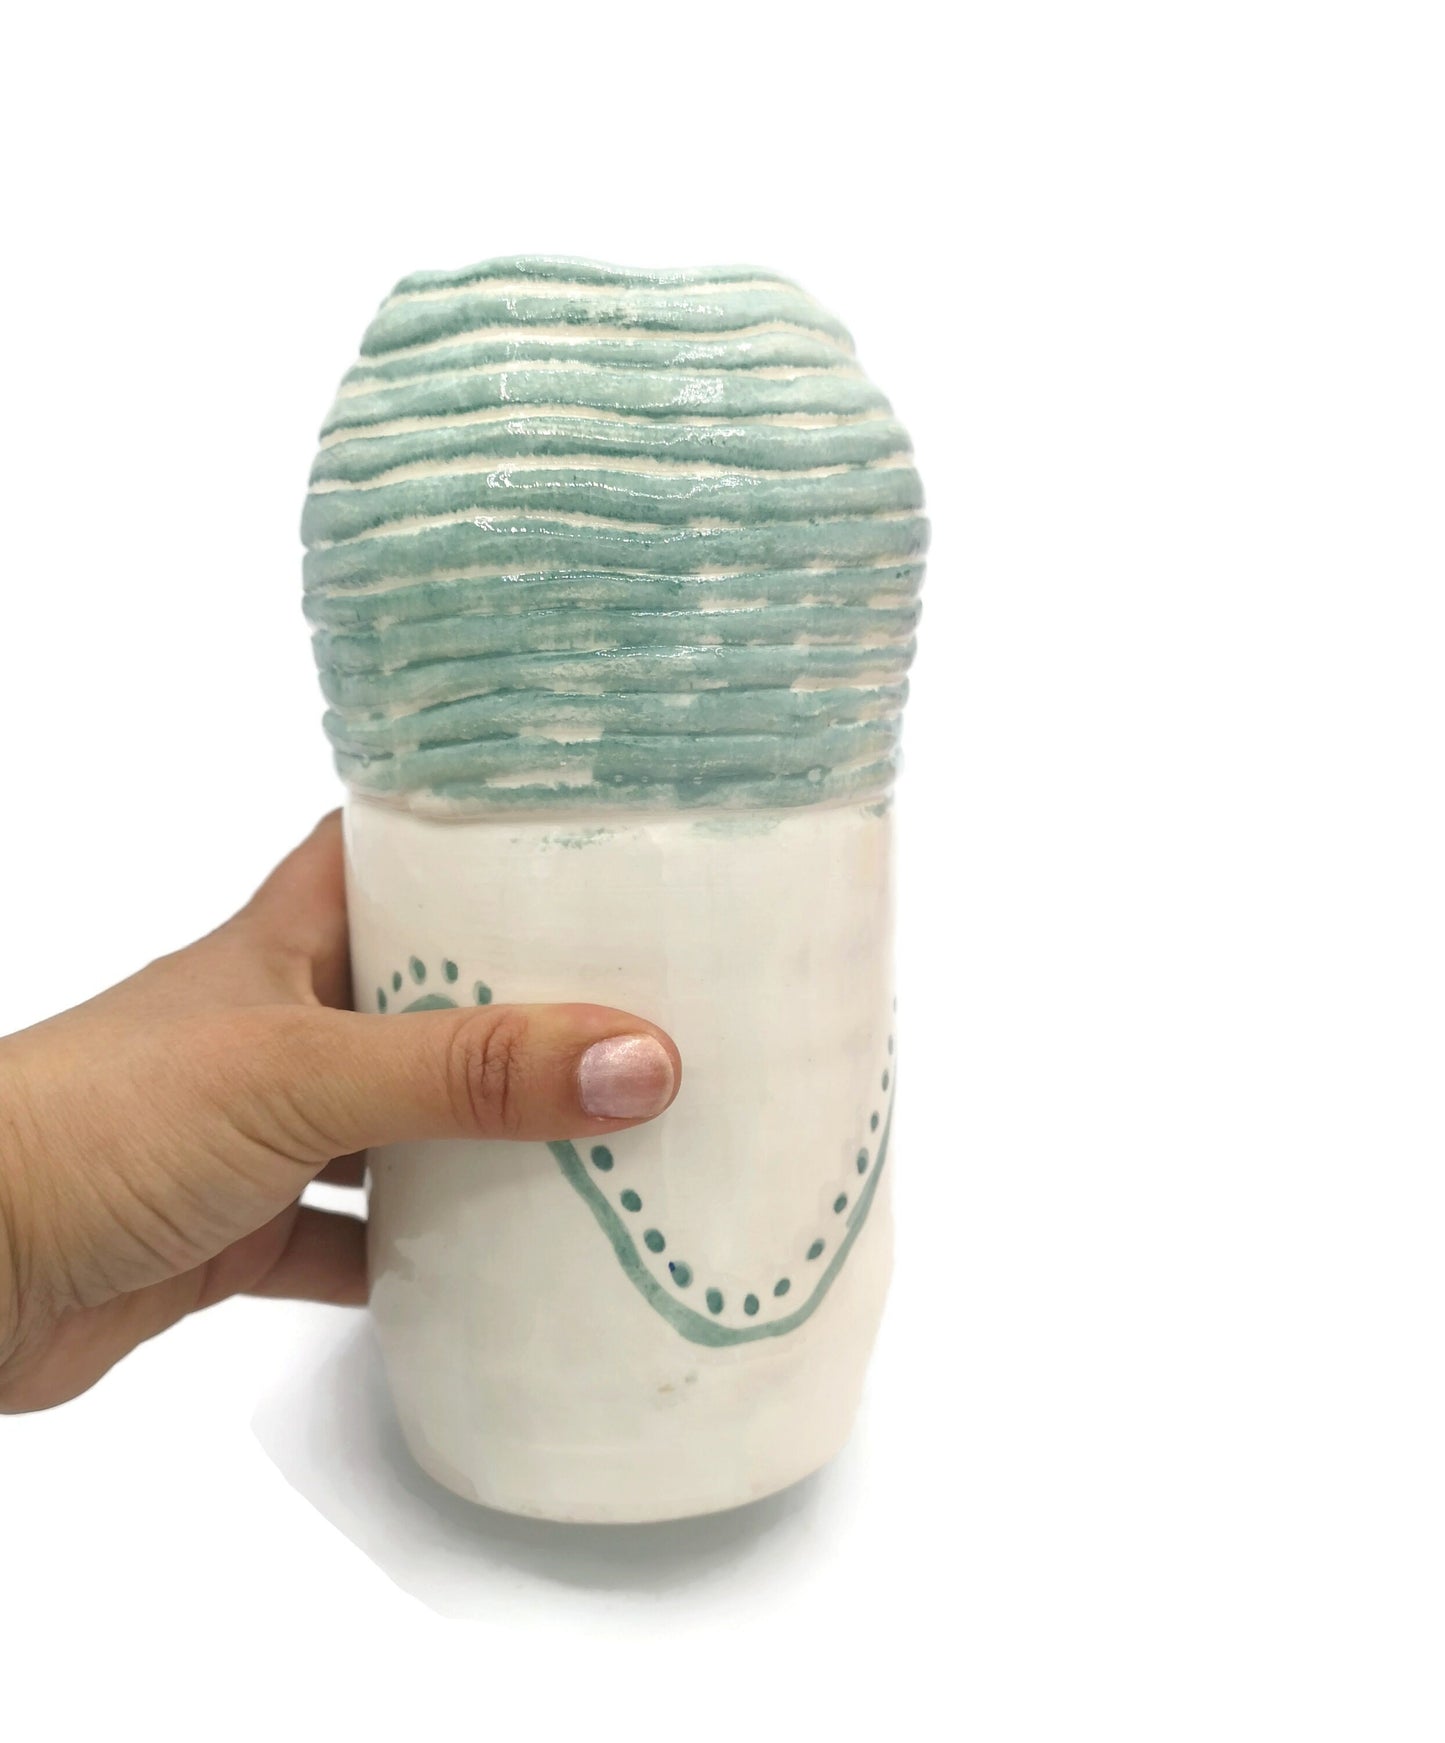 Handmade Ceramic Vase Hand Painted Sage Green Pottery For Home Decor, Portuguese Tall Vase With Texture To Put Fresh Flowers - Ceramica Ana Rafael